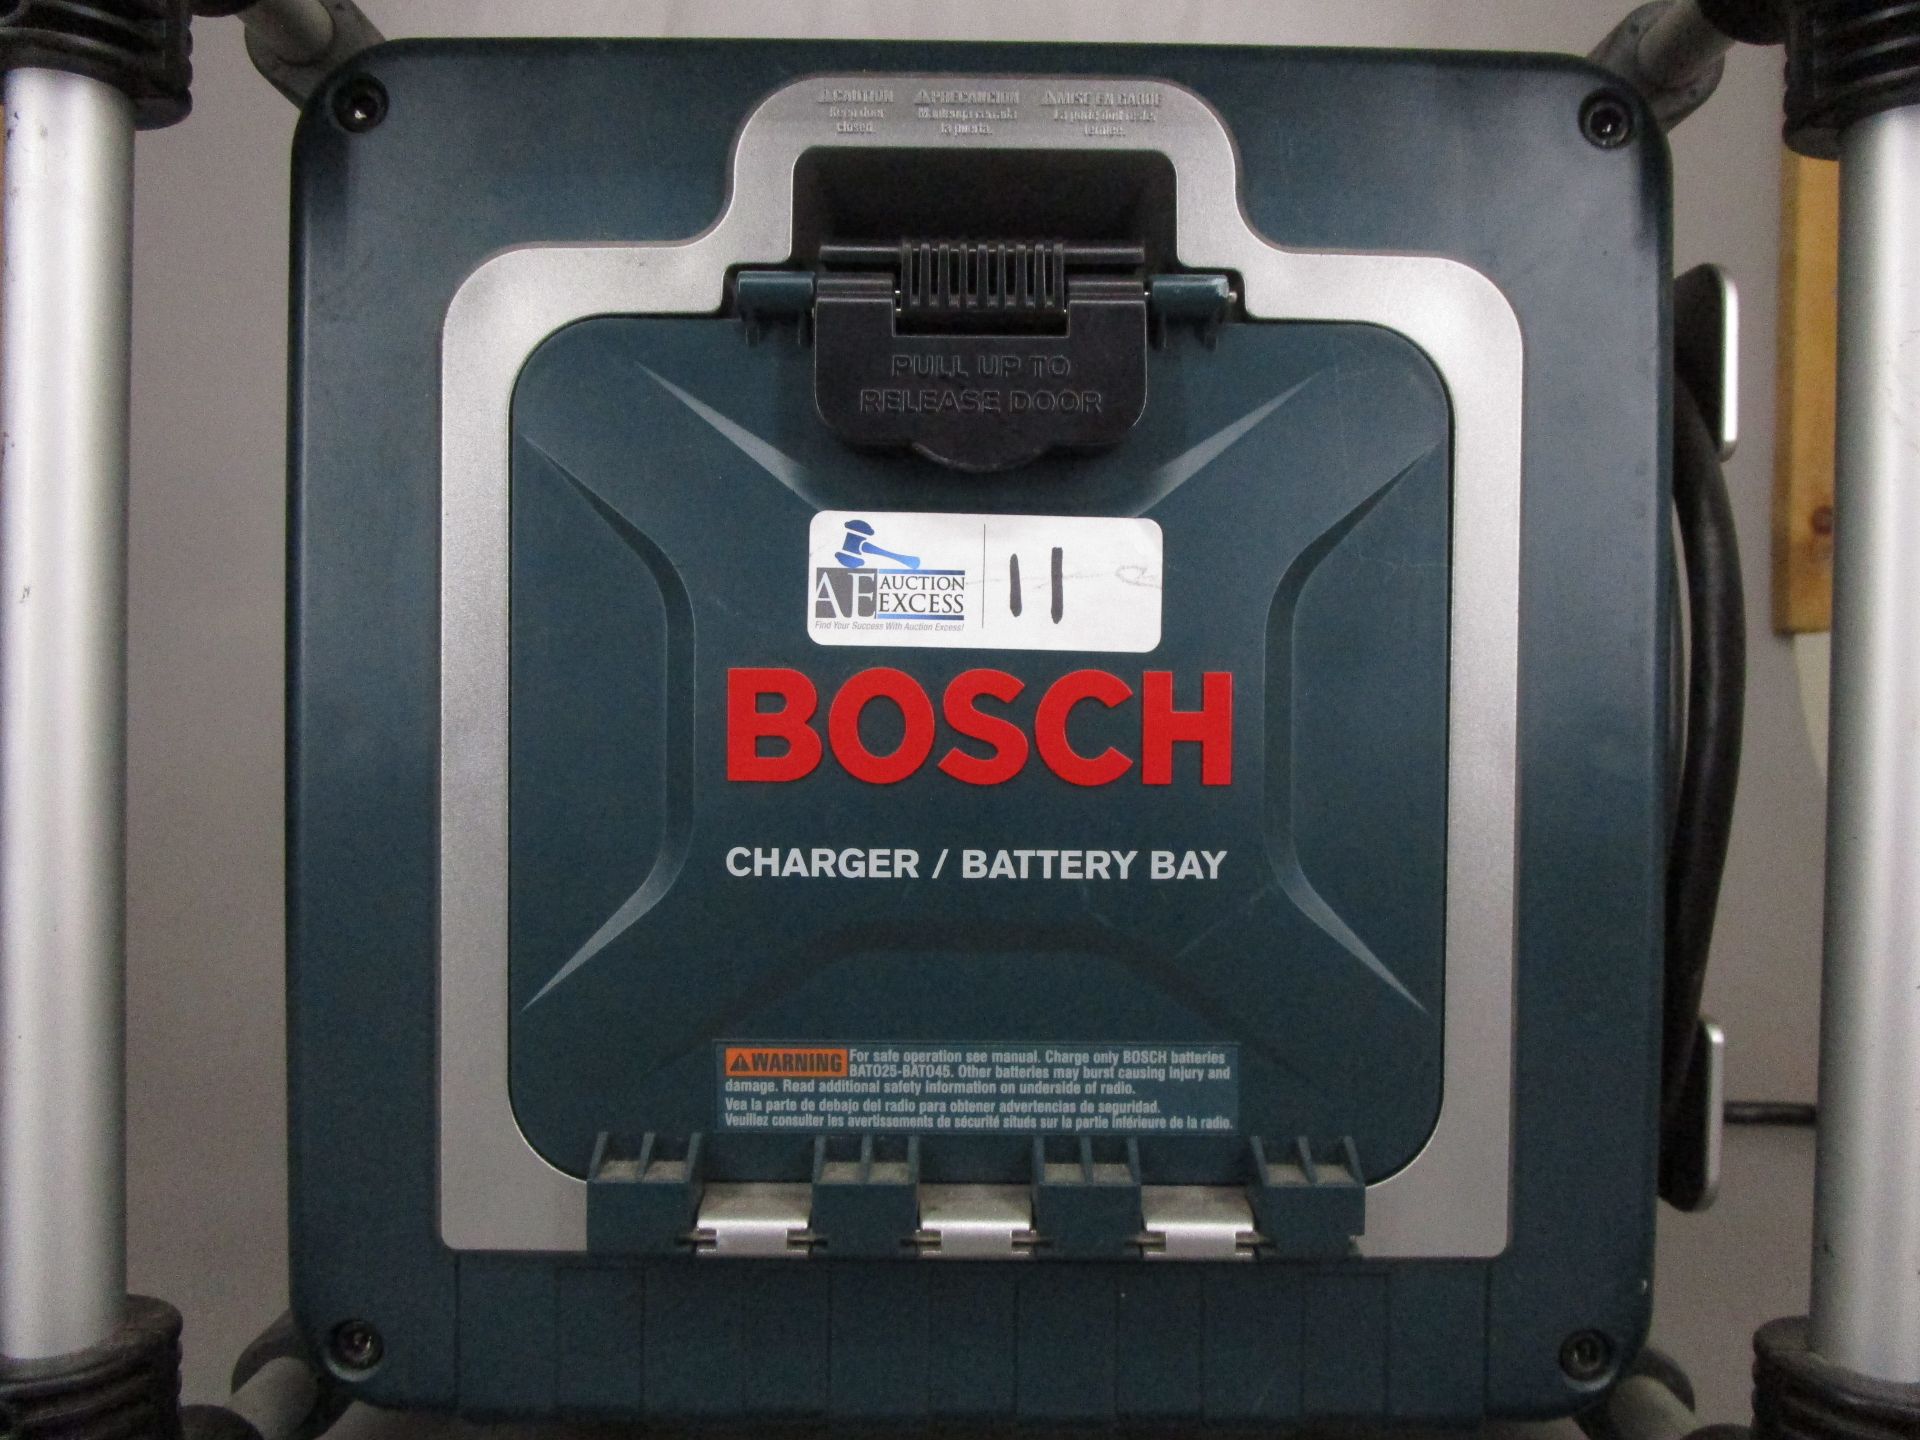 BOSCH POWER BOX CHARGER BATTERY BAY - Image 3 of 4